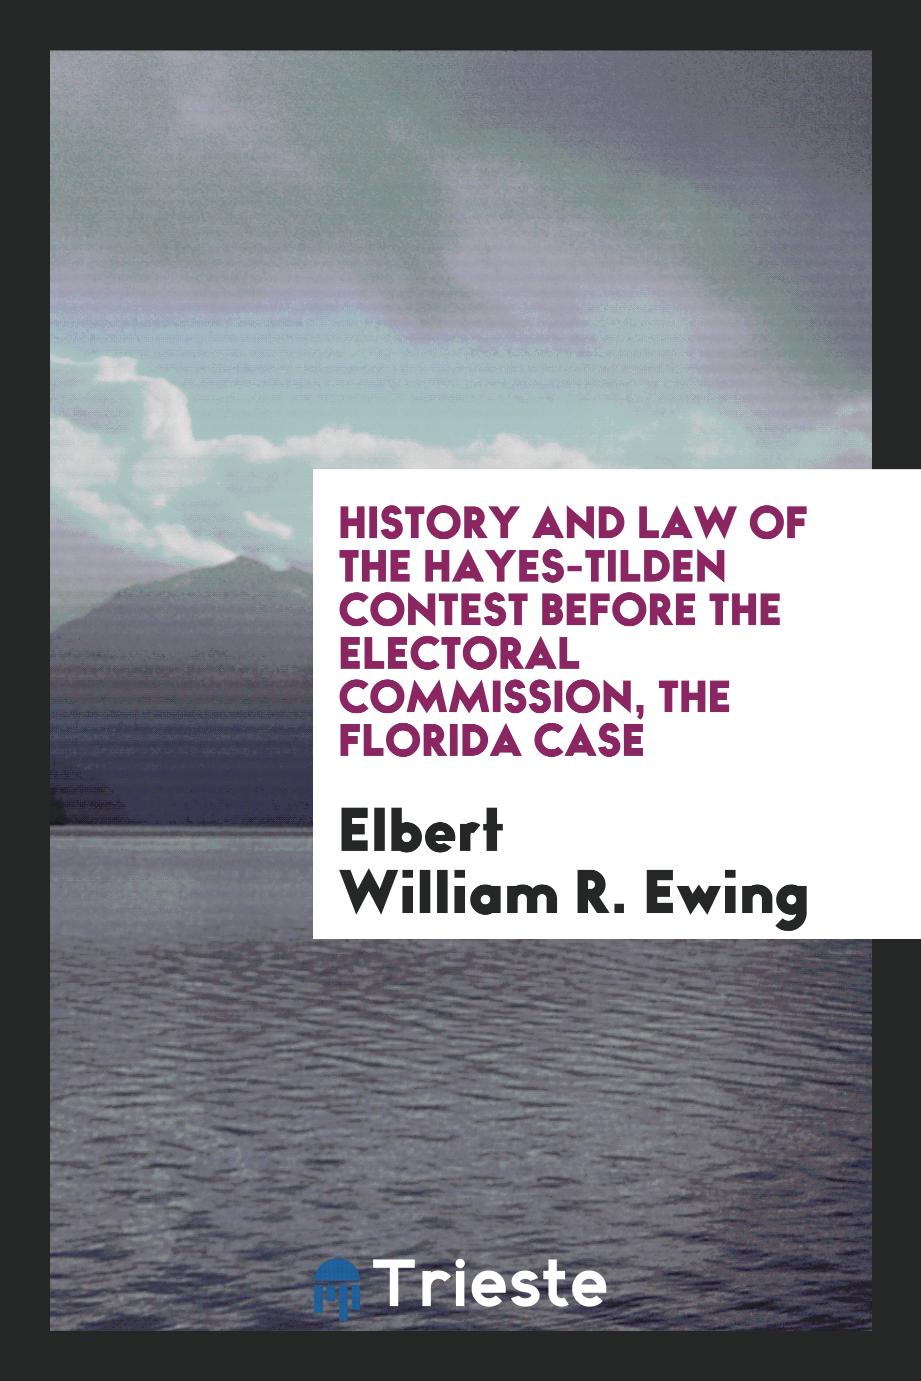 History and law of the Hayes-Tilden contest before the Electoral Commission, the Florida case